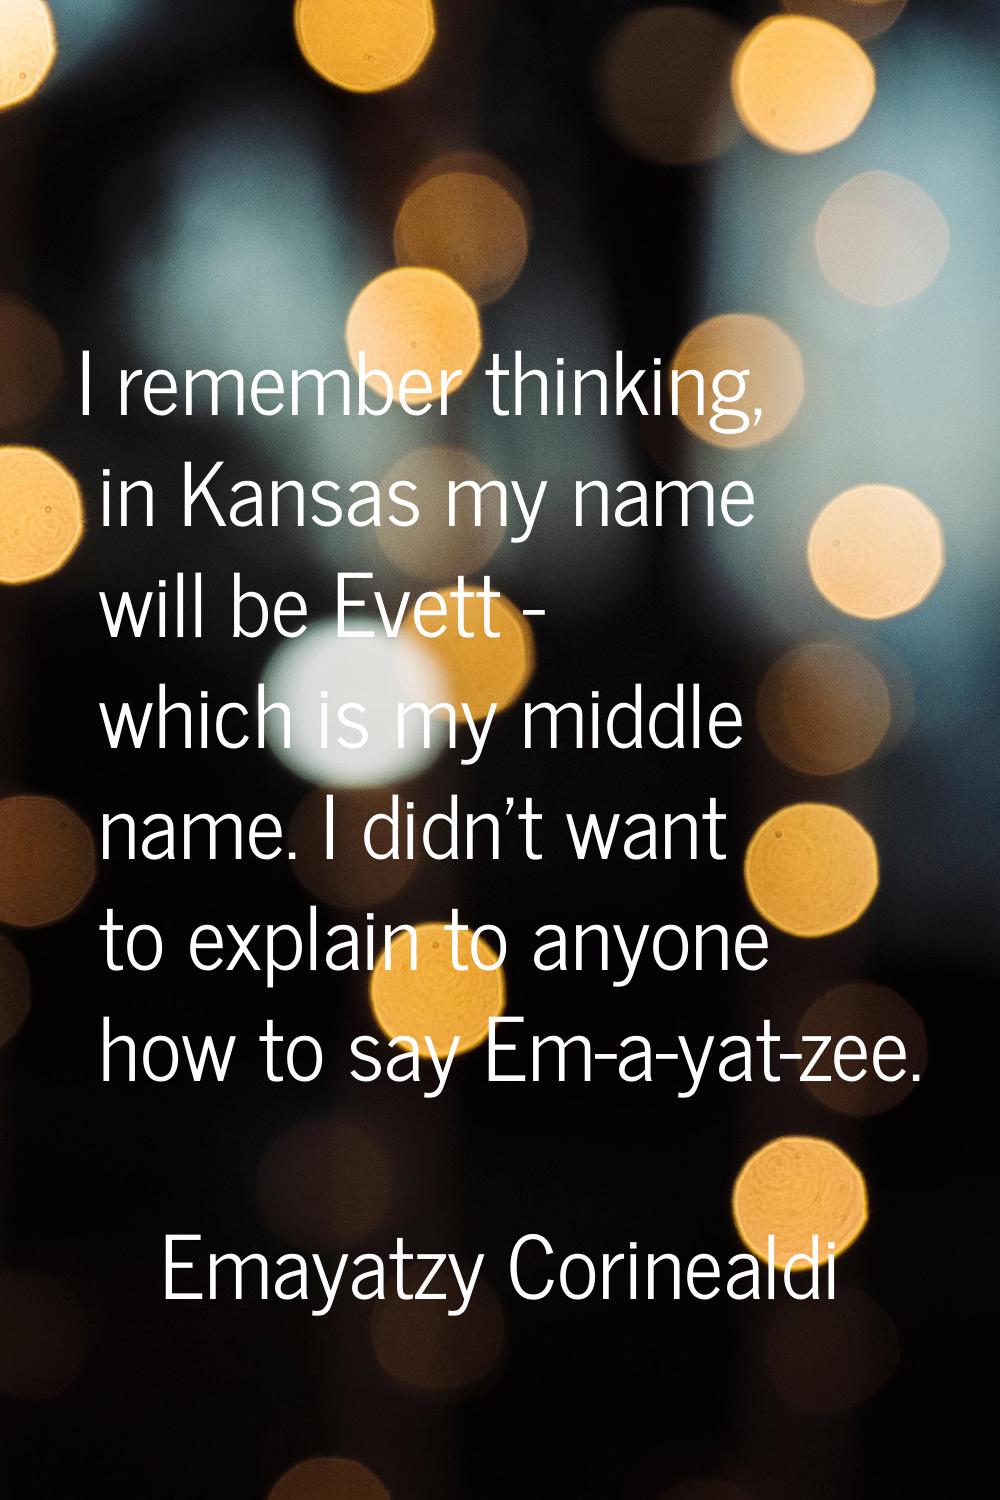 I remember thinking, in Kansas my name will be Evett - which is my middle name. I didn't want to ex